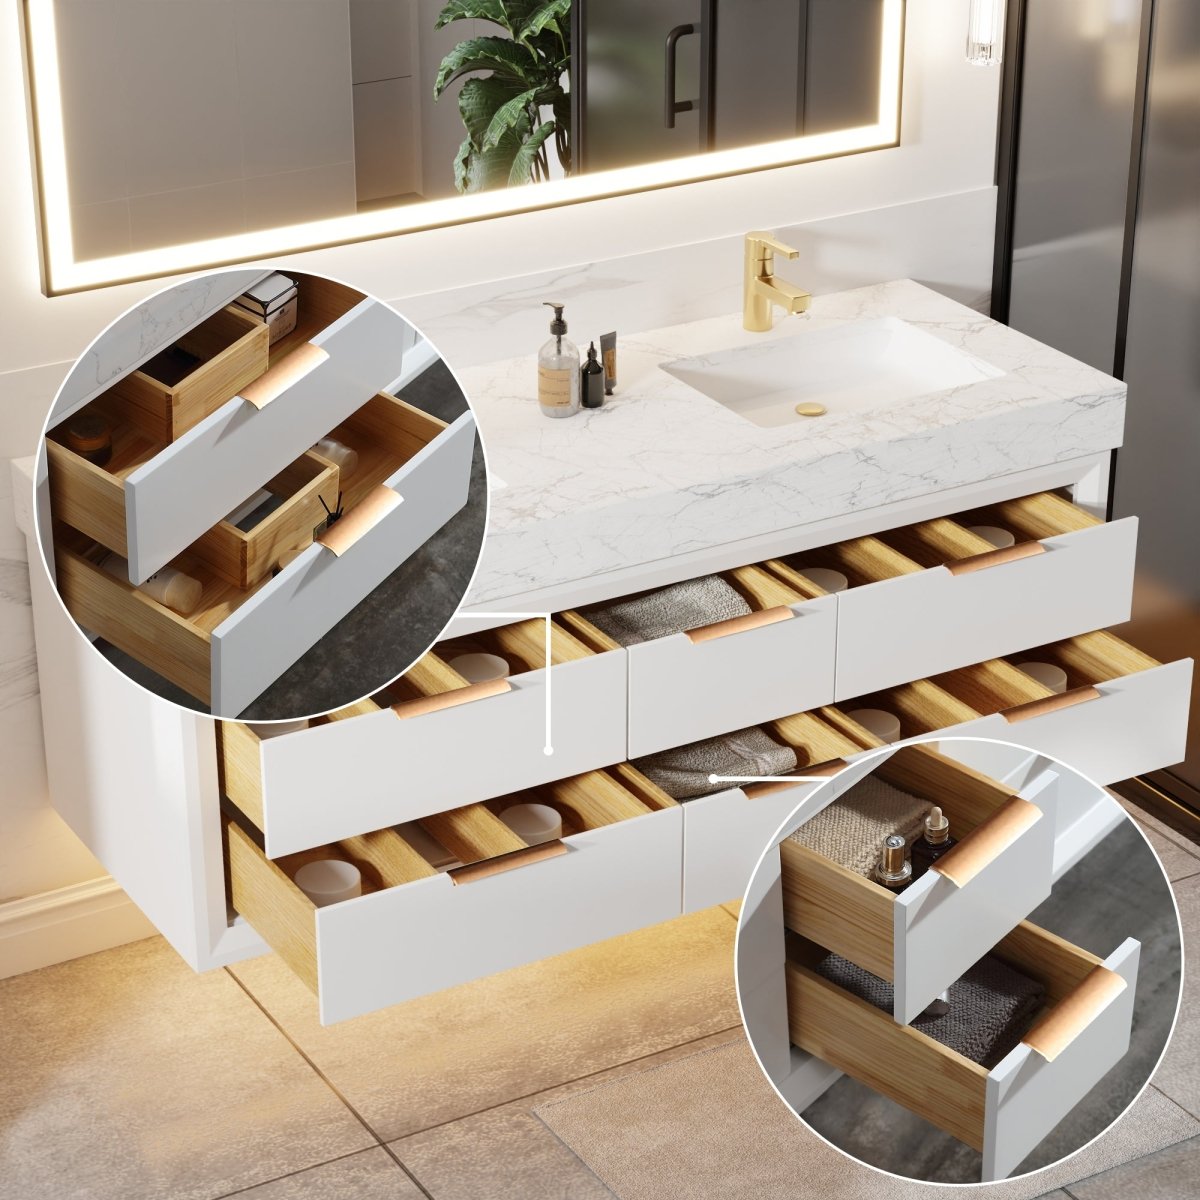 Glam 60" Modern Floating Rubberwood Bathroom Vanity Cabinet with Lights and Stone Slab Countertop in White